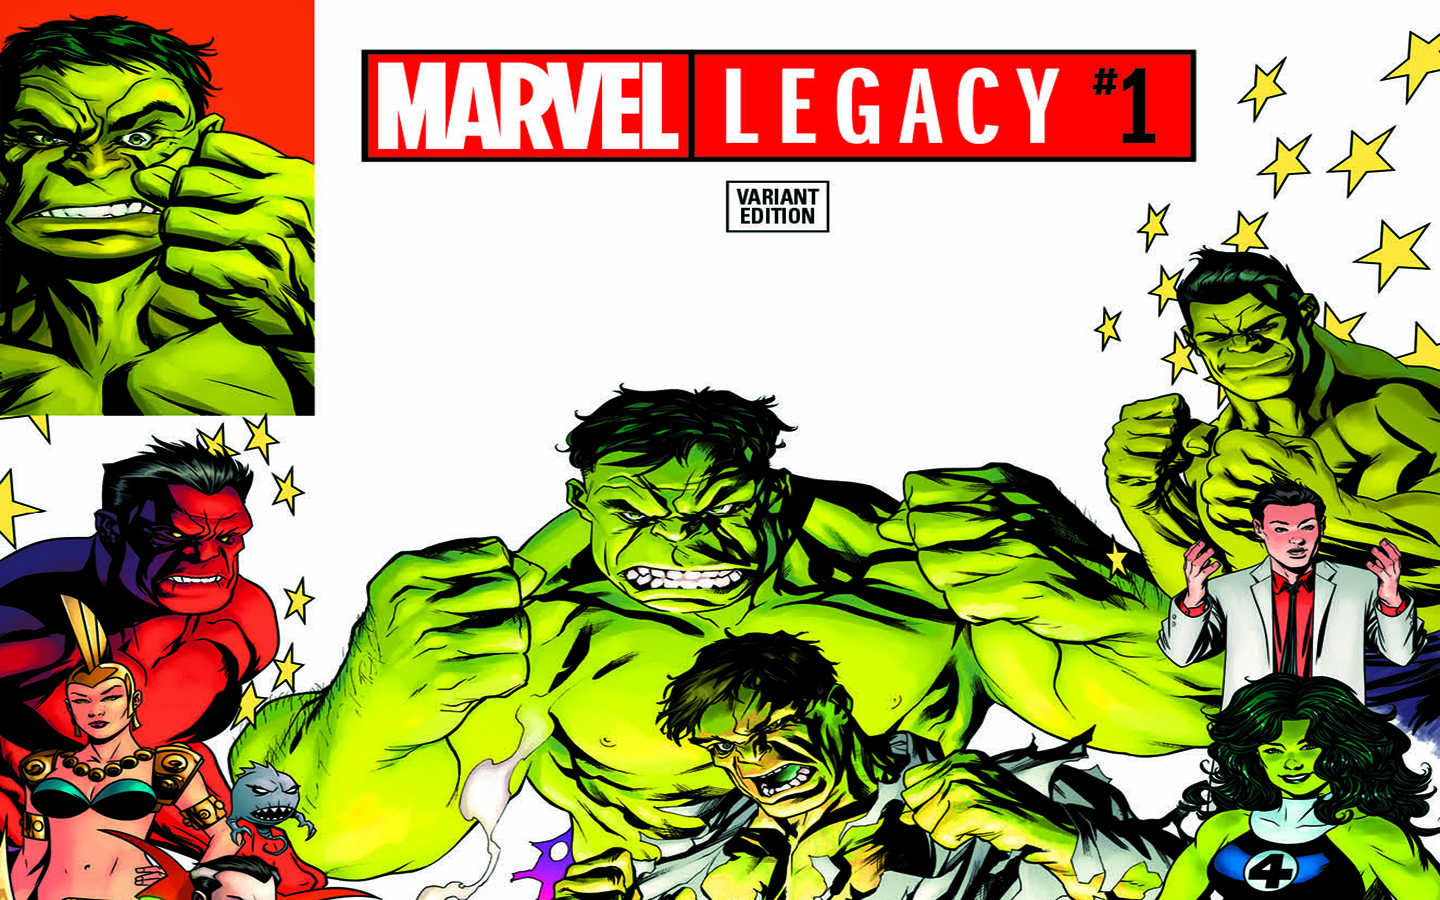 Exclusive First Issue of Marvel Legacy featuring The Hulk Available on eBay